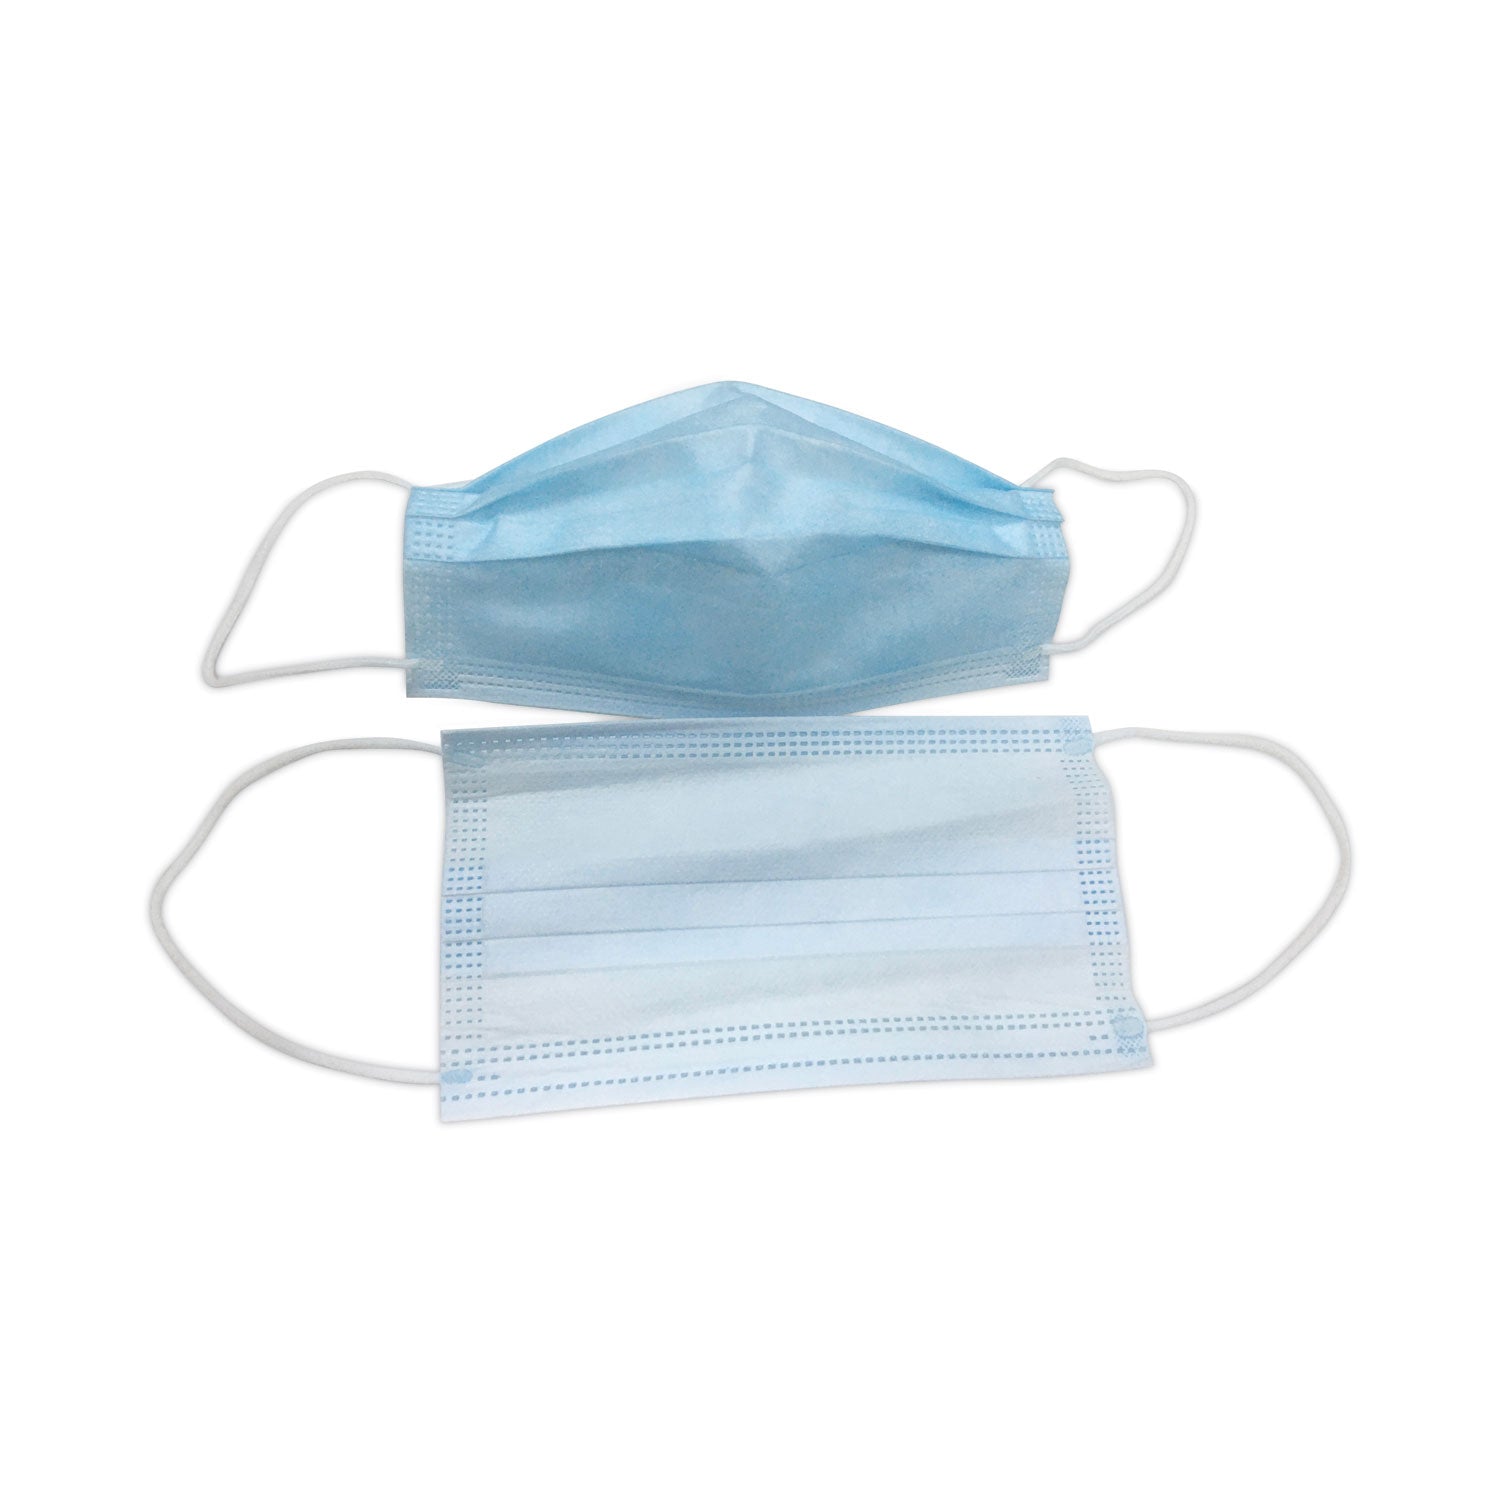 three-ply-general-use-face-mask-blue-white-2500-carton_tehms2500 - 4